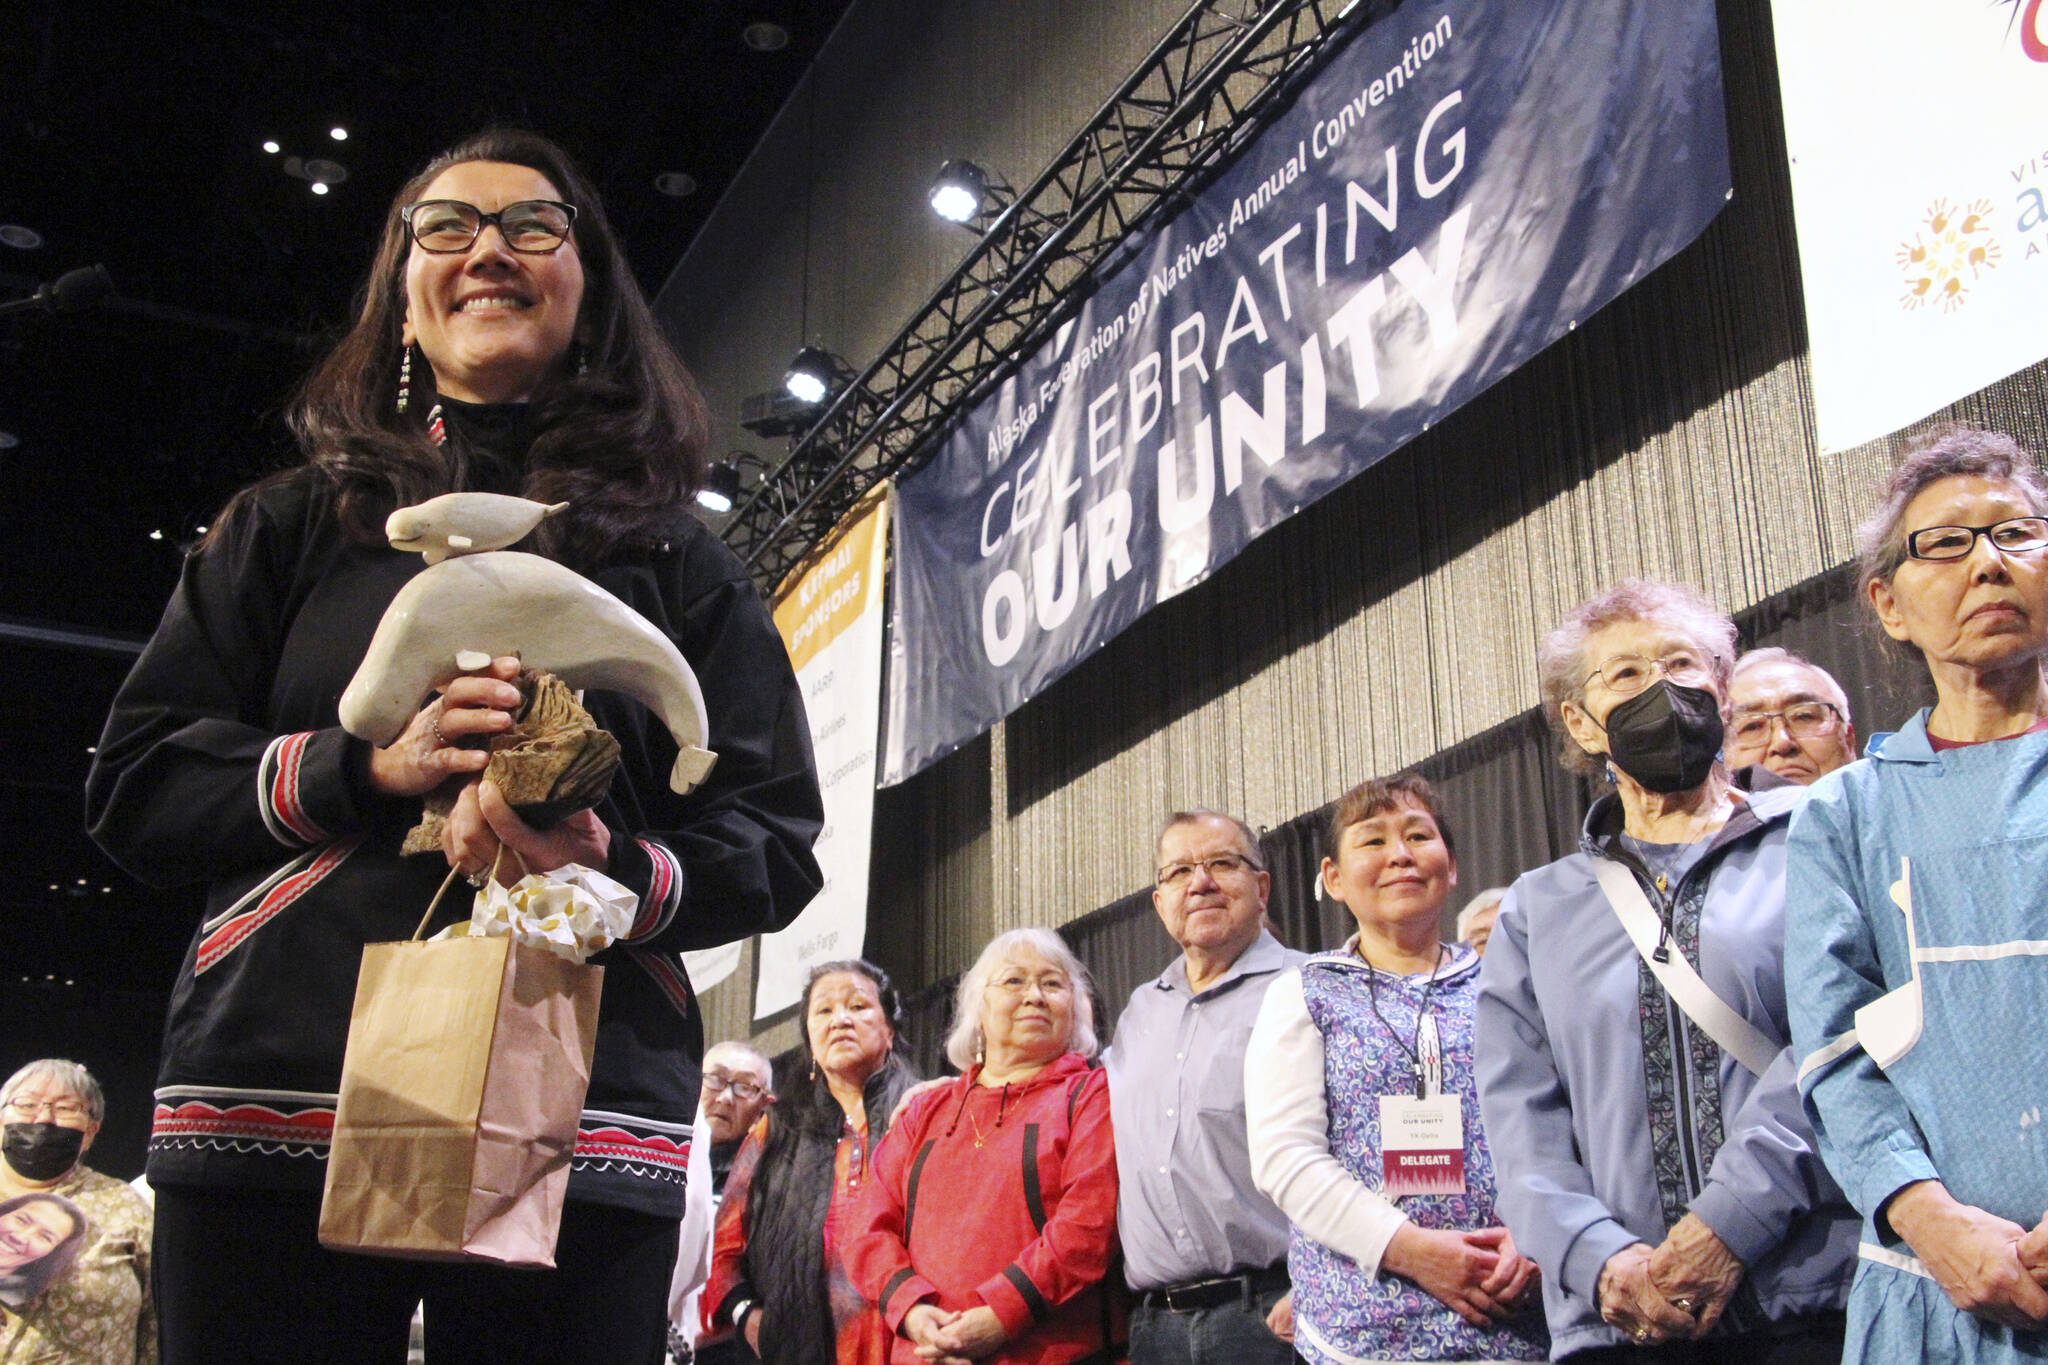 U.S. Rep. Mary Peltola, left, acknowledges audience members singing a song of prayer for her at the Alaska Federation of Natives conference in Anchorage on Thursday. Peltola, a Democrat, is the first Alaska Native to be elected to Congress. (AP Photo / Mark Thiessen)